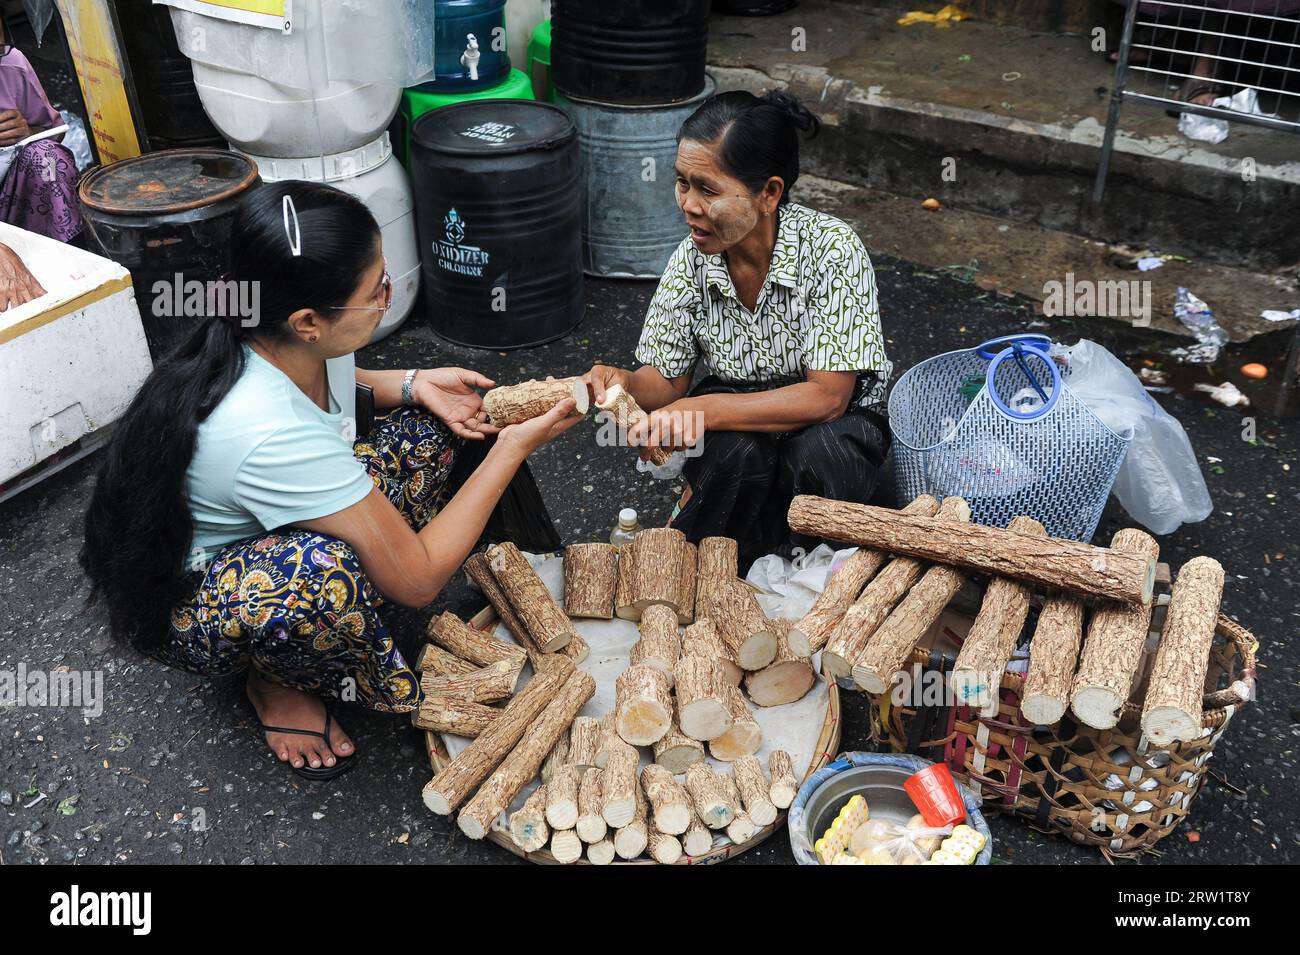 01.08.2013, Myanmar, Yangon, Yangon - A daily market scene shows a woman buying thanaka wood at a street market in the city centre to make a paste for Stock Photo